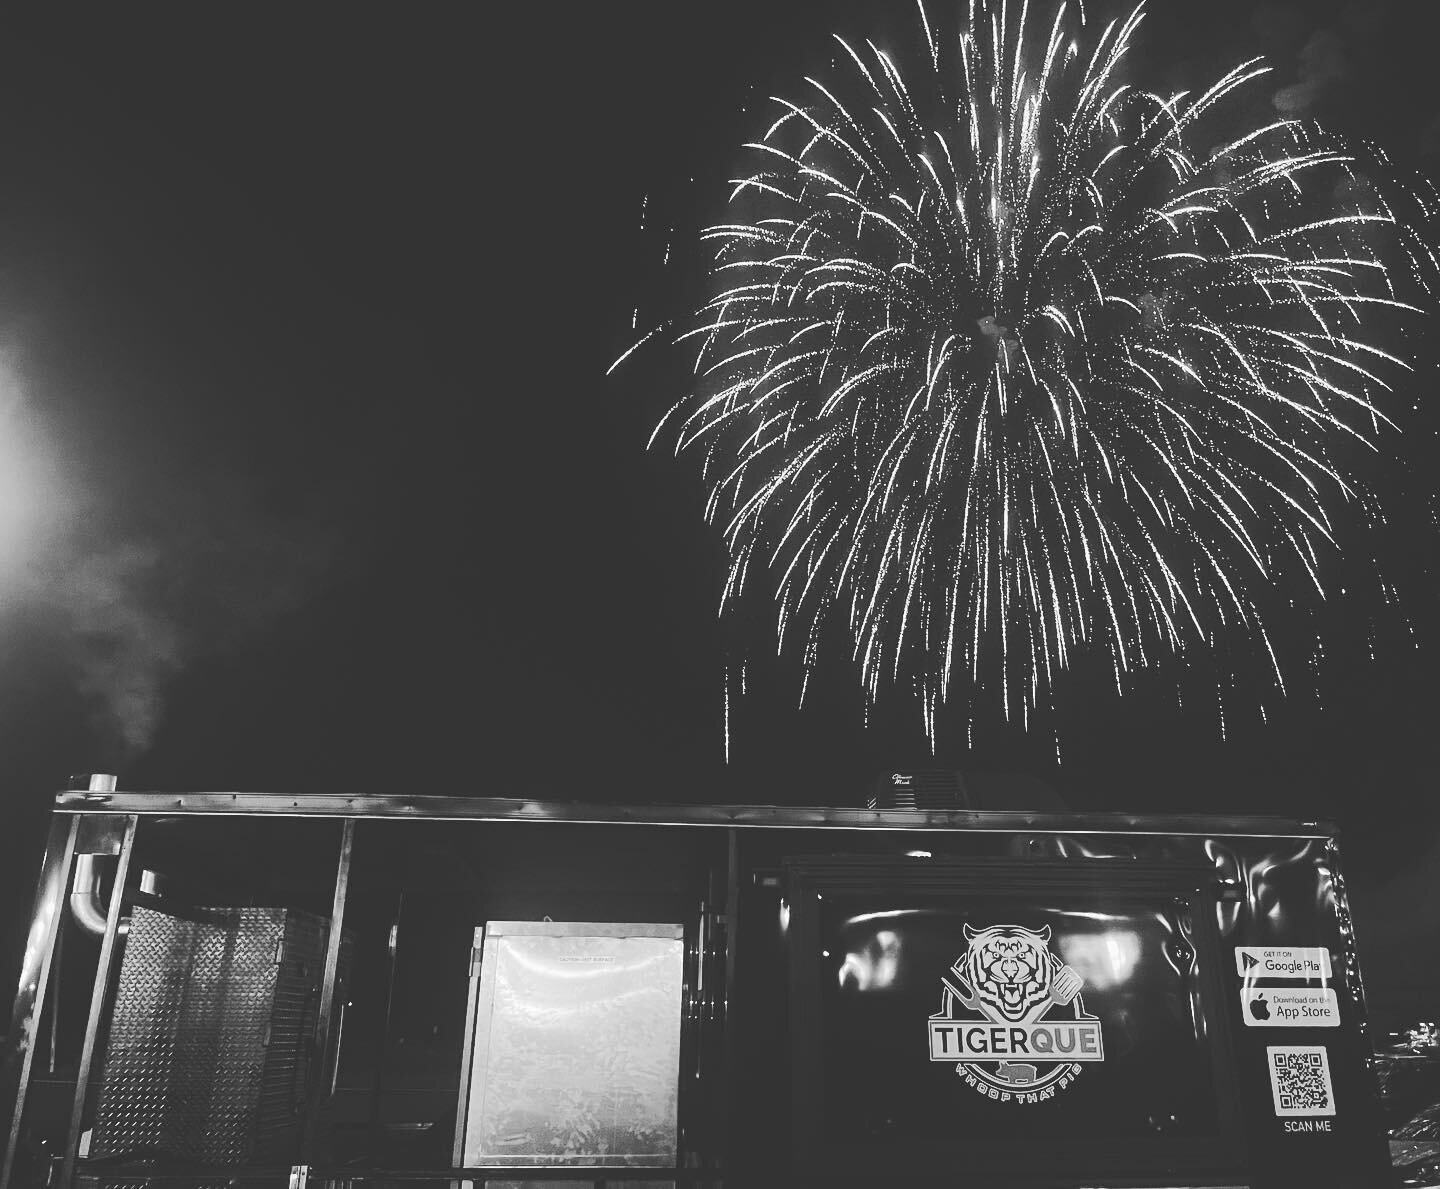 Thank you @thornwoodgermantown for the invitation to setup tonight! Germantown knows how to put on a fireworks show!! We appreciate everyone that came by for some BBQ tonight. We sold out right before the show. #TigerQue #Germantown